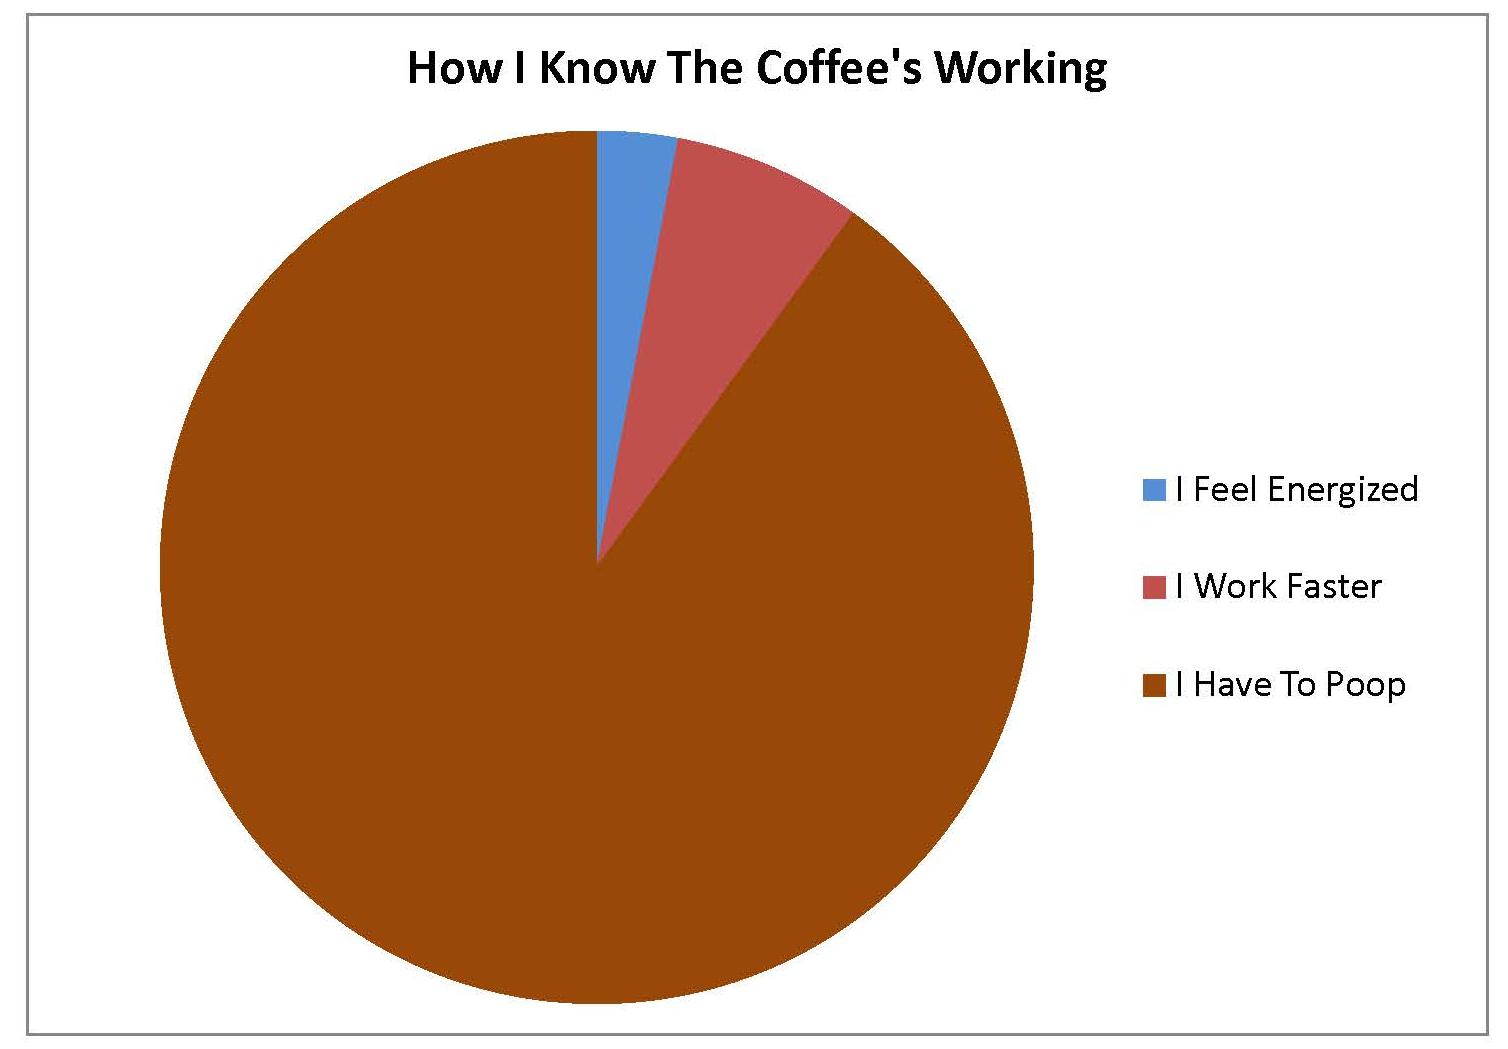 34 Images That Will Make You Want Coffee